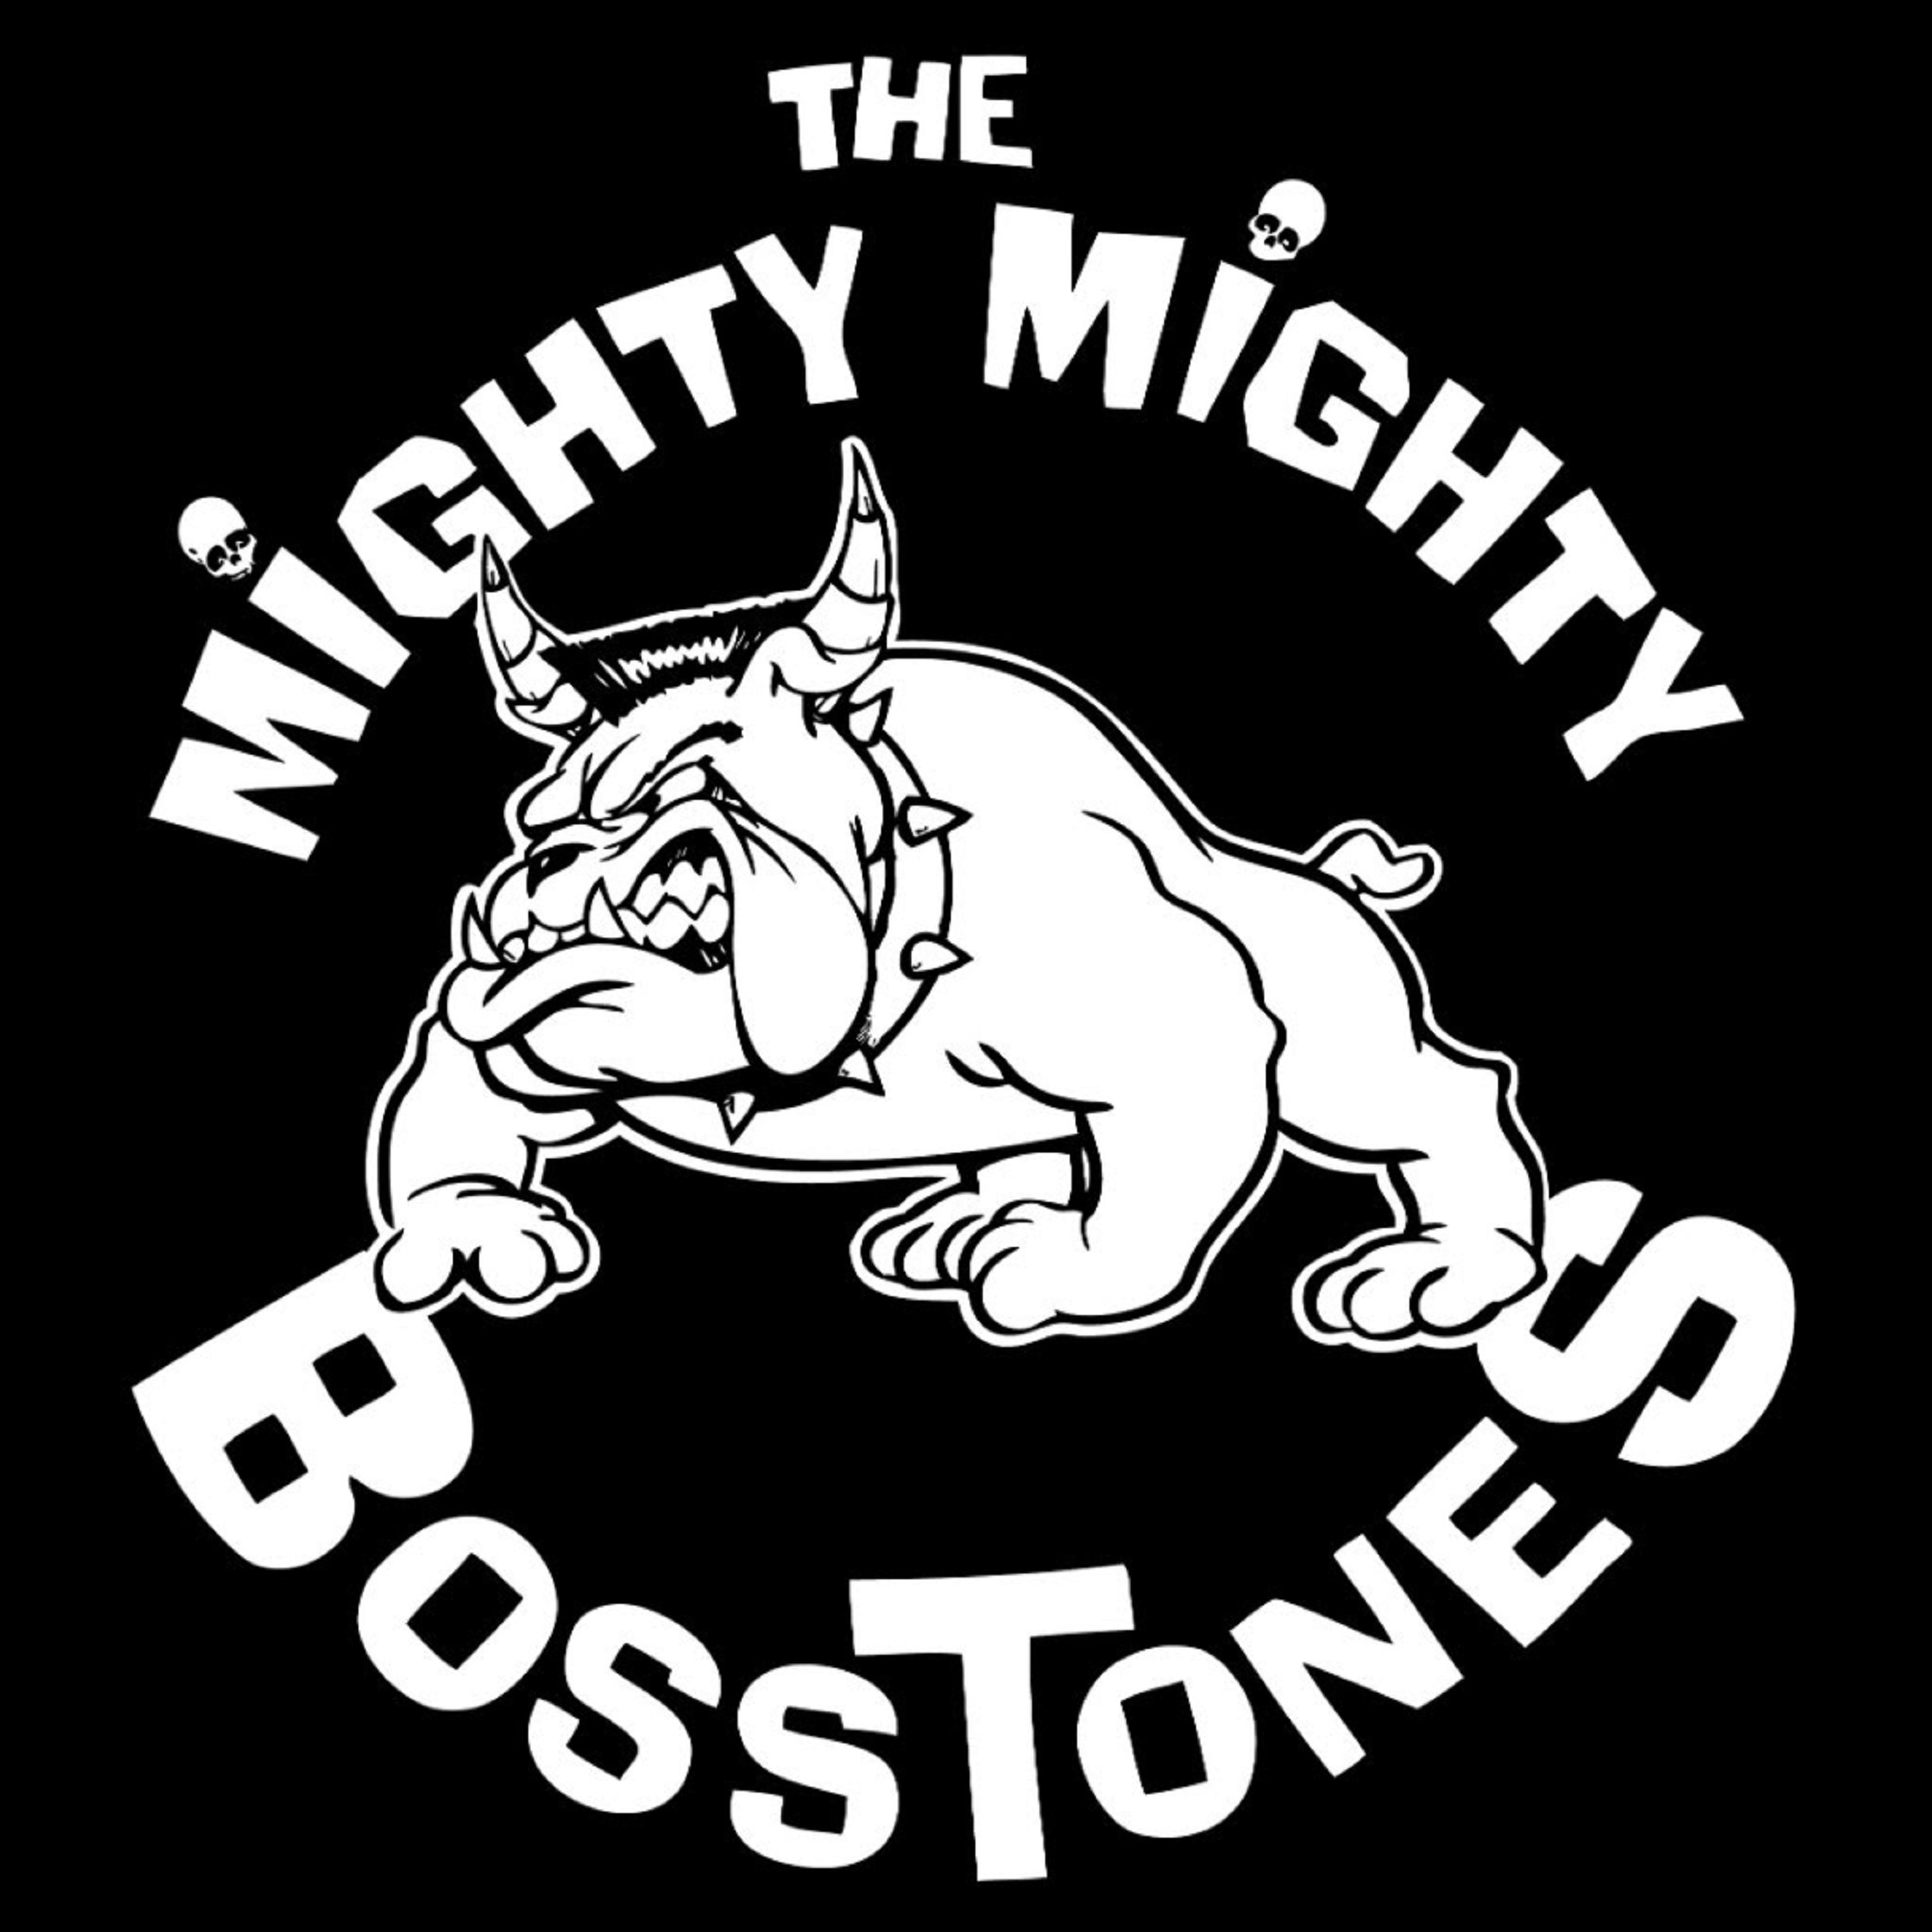 The Mighty Mighty BossToneS Launch 'The Cranking & Skanking Fest' on August 25th